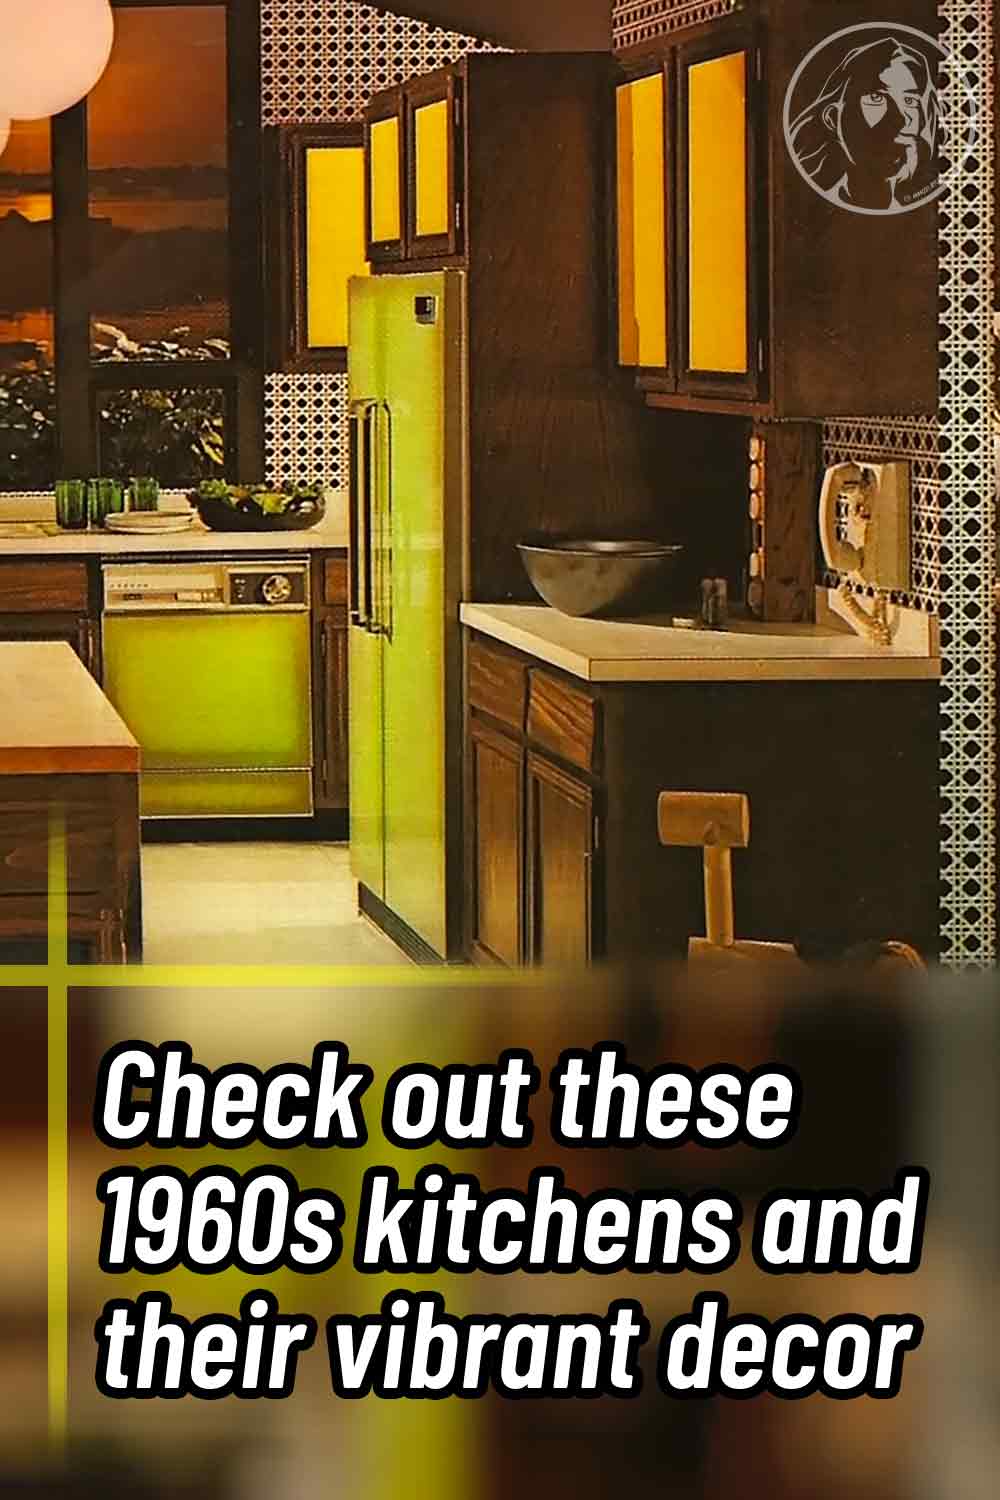 Check out these 1960s kitchens and their vibrant decor